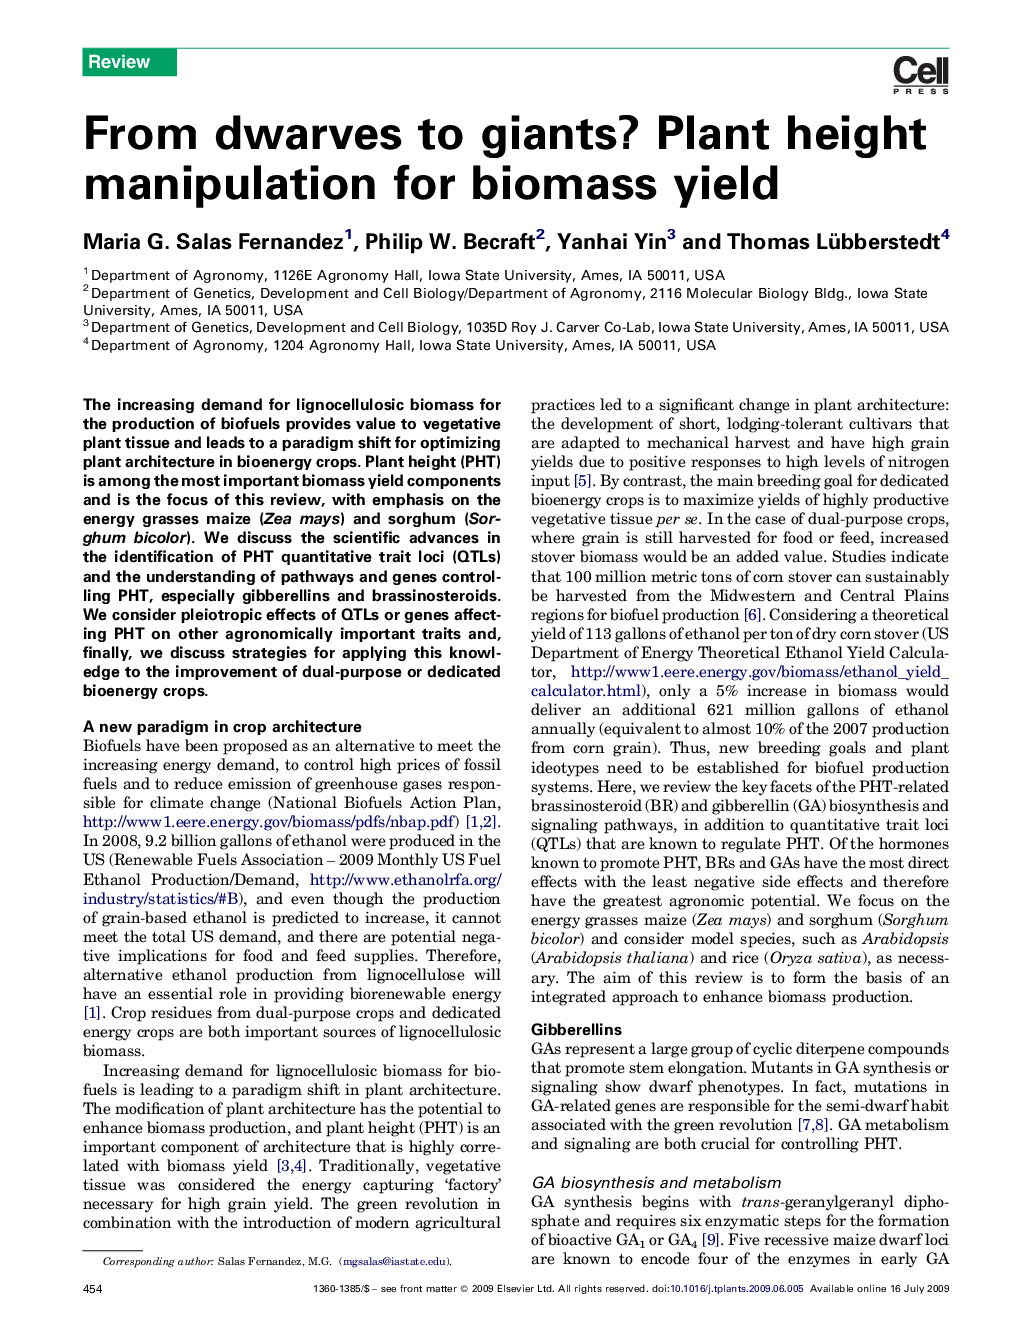 From dwarves to giants? Plant height manipulation for biomass yield